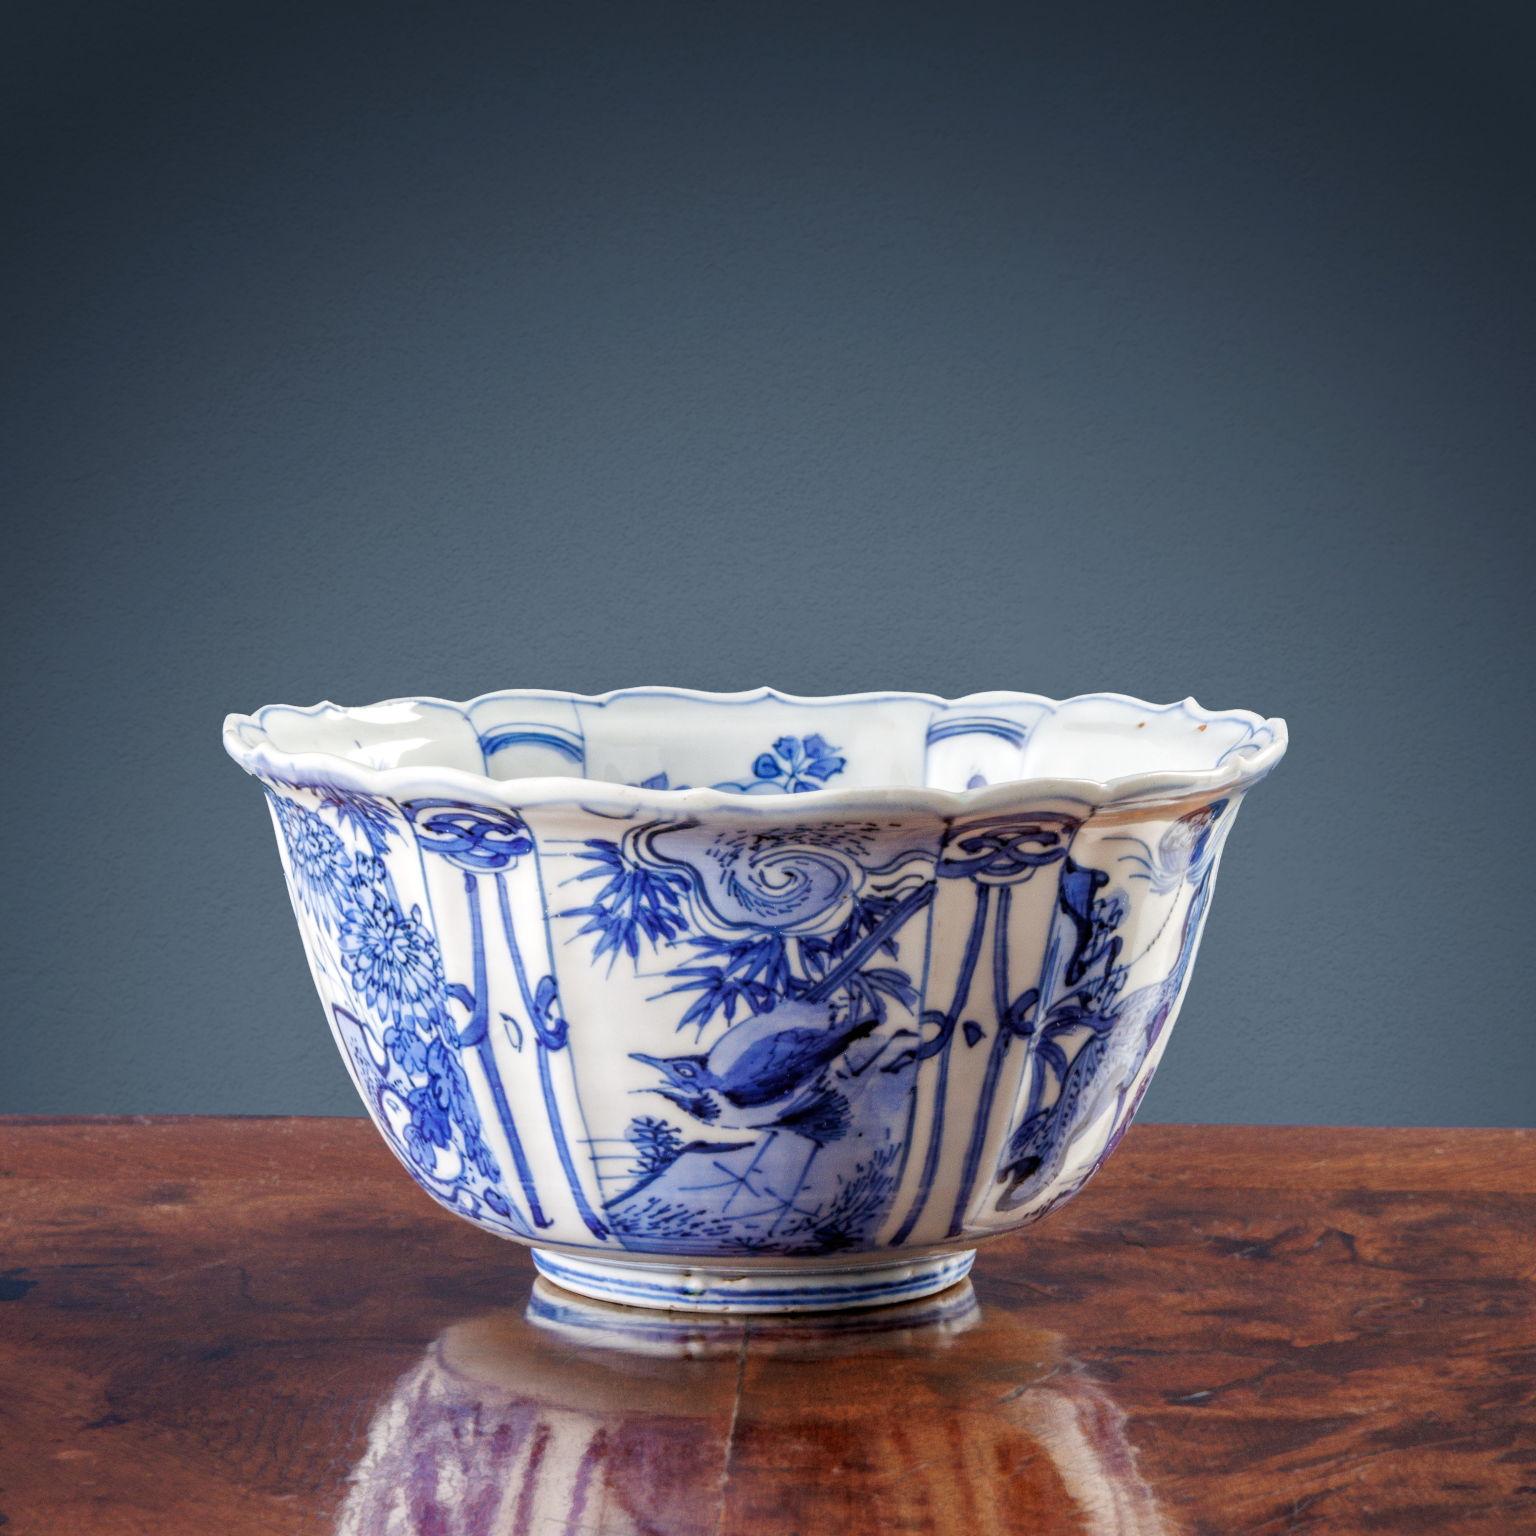 Kraak type porcelain bowl. It has polylobed border and it is painted in blue. It features decorations with birds, flowers and ornamental rocks within alternating reserves of tassels that descend from “ruyi”.

The interior is delicately decorated